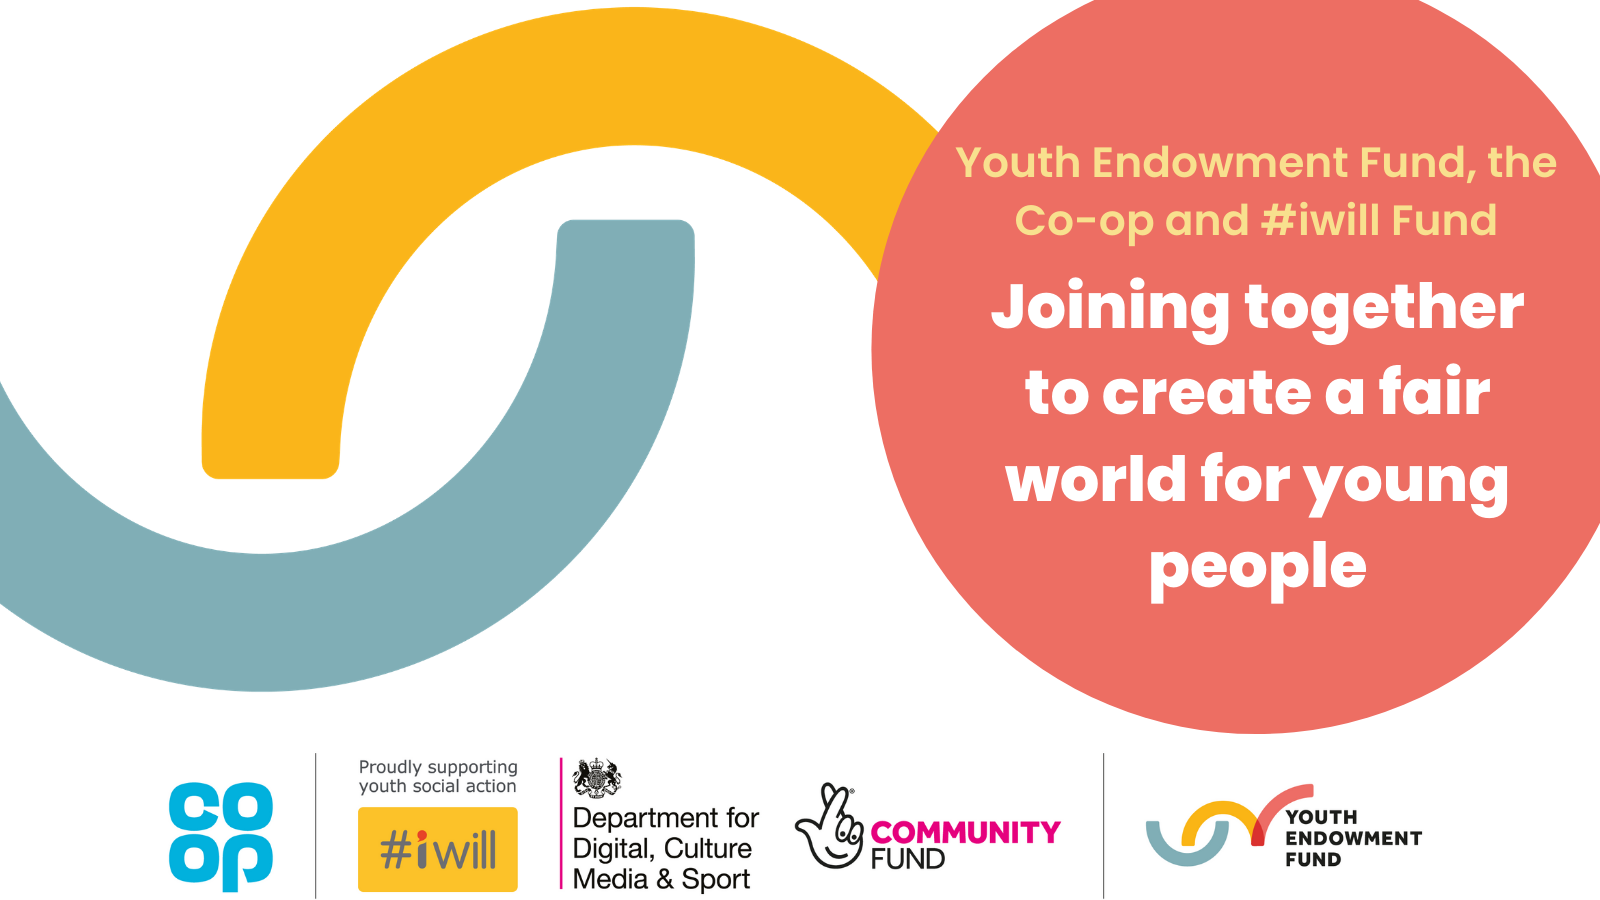 Joining together to create a fair world for young people